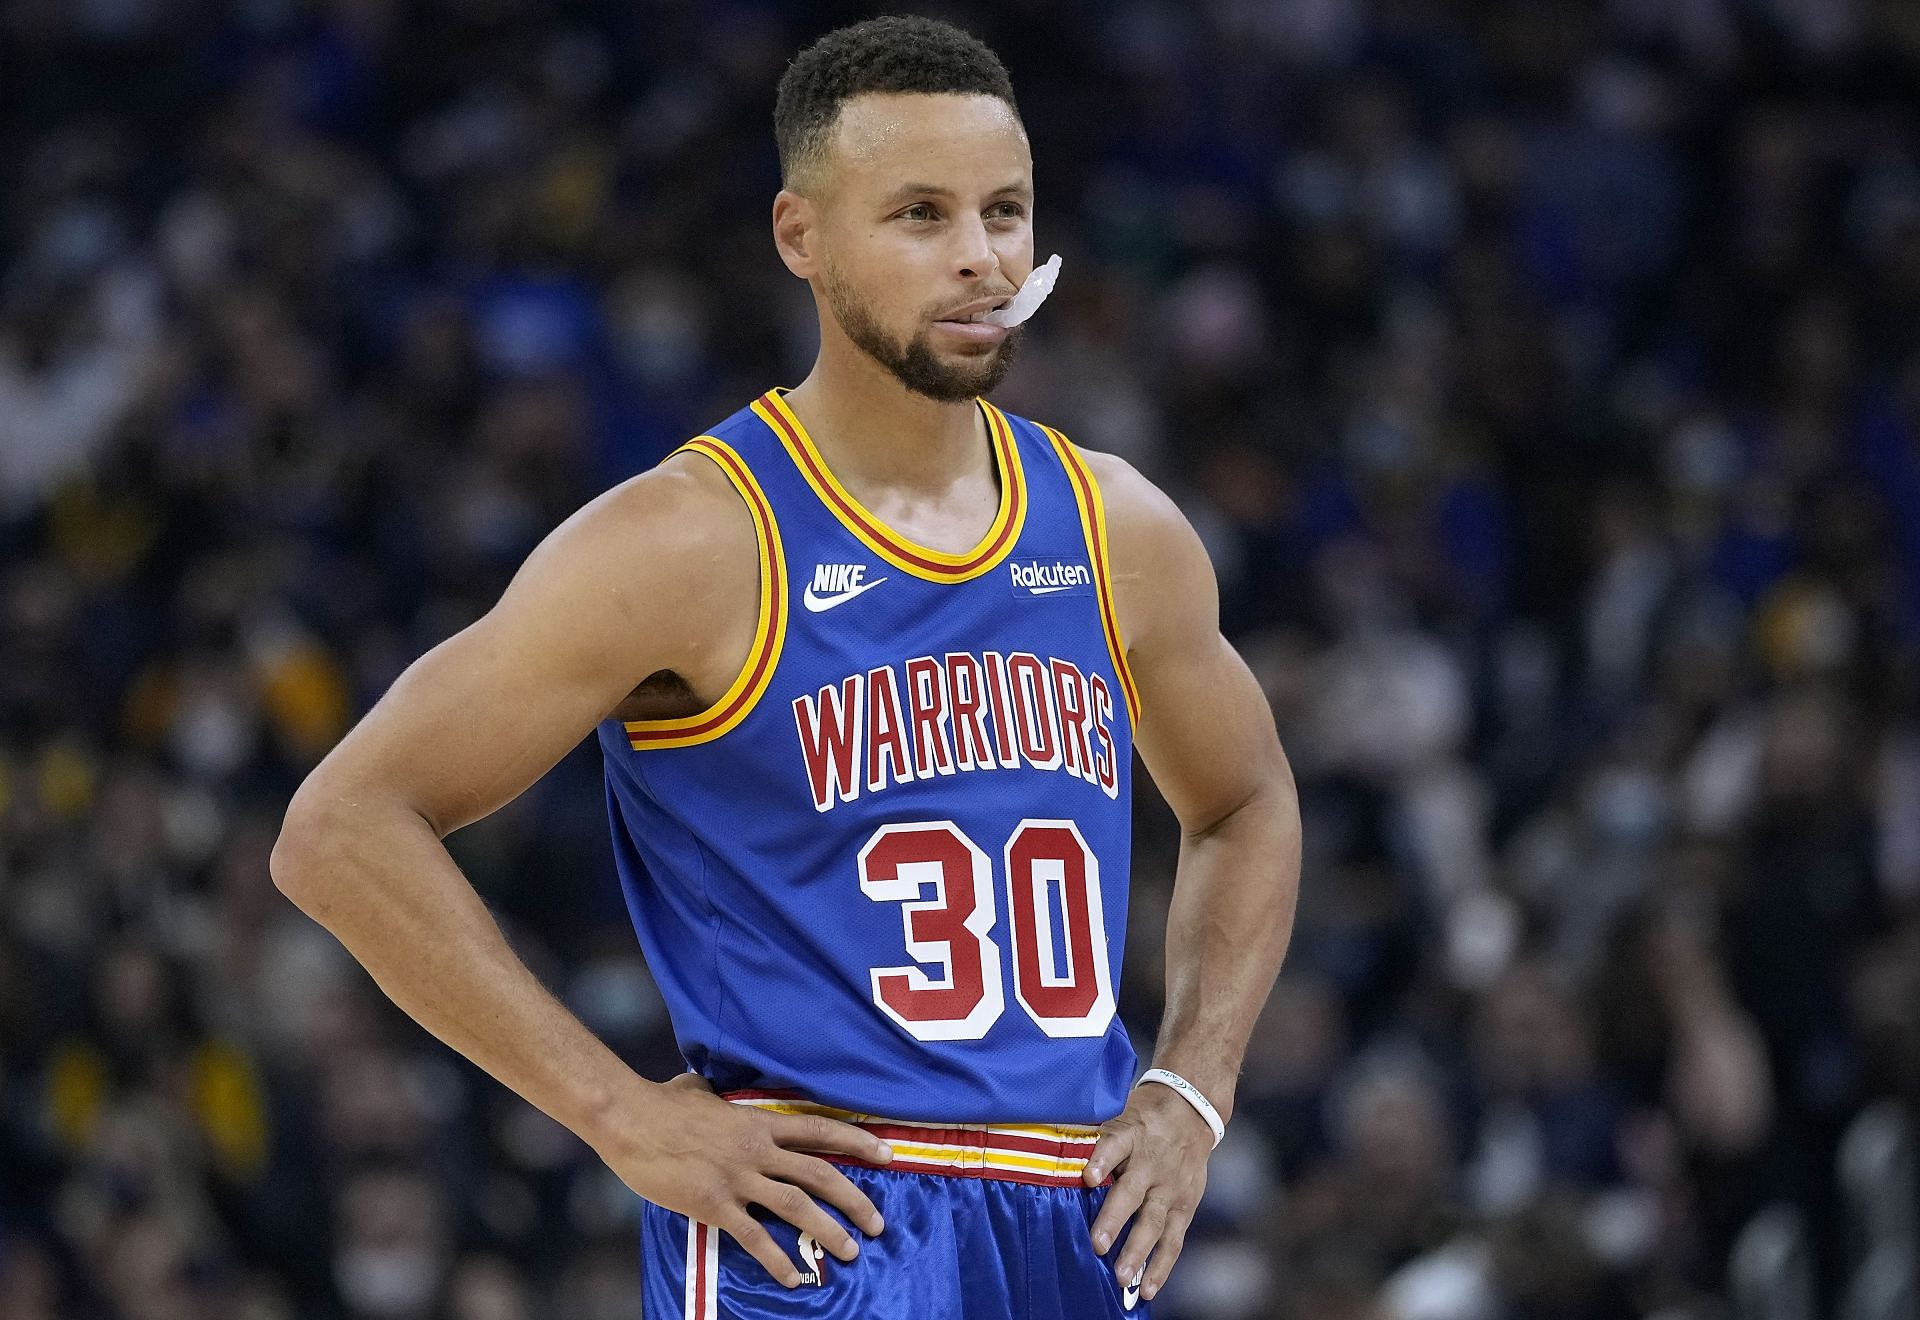 Stephen Curry #30 of the Golden State Warriors looks on against the LA Clippers during the second quarter at Chase Center on October 21, 2021 in San Francisco, California.